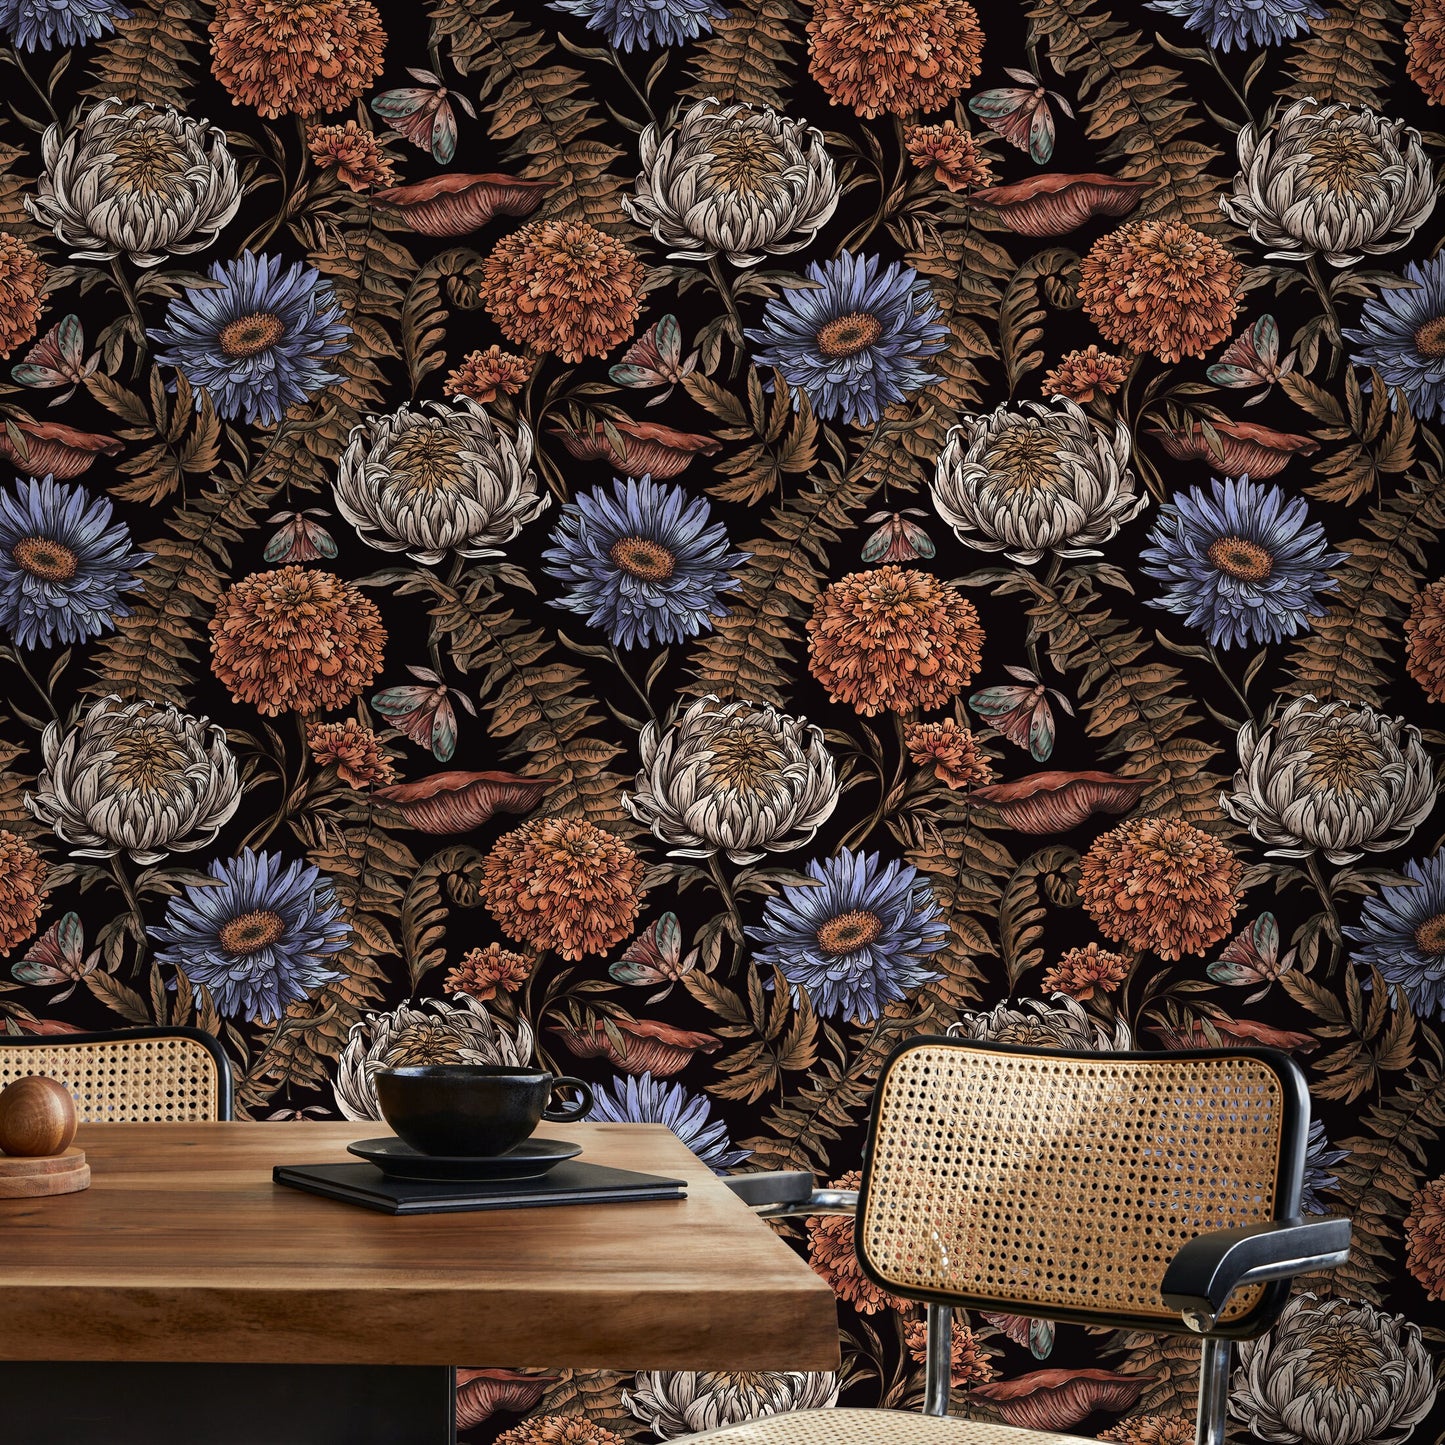 Floral Garden Wallpaper Peonny and Butterflies Wallpaper Peel and Stick and Traditional Wallpaper - D822